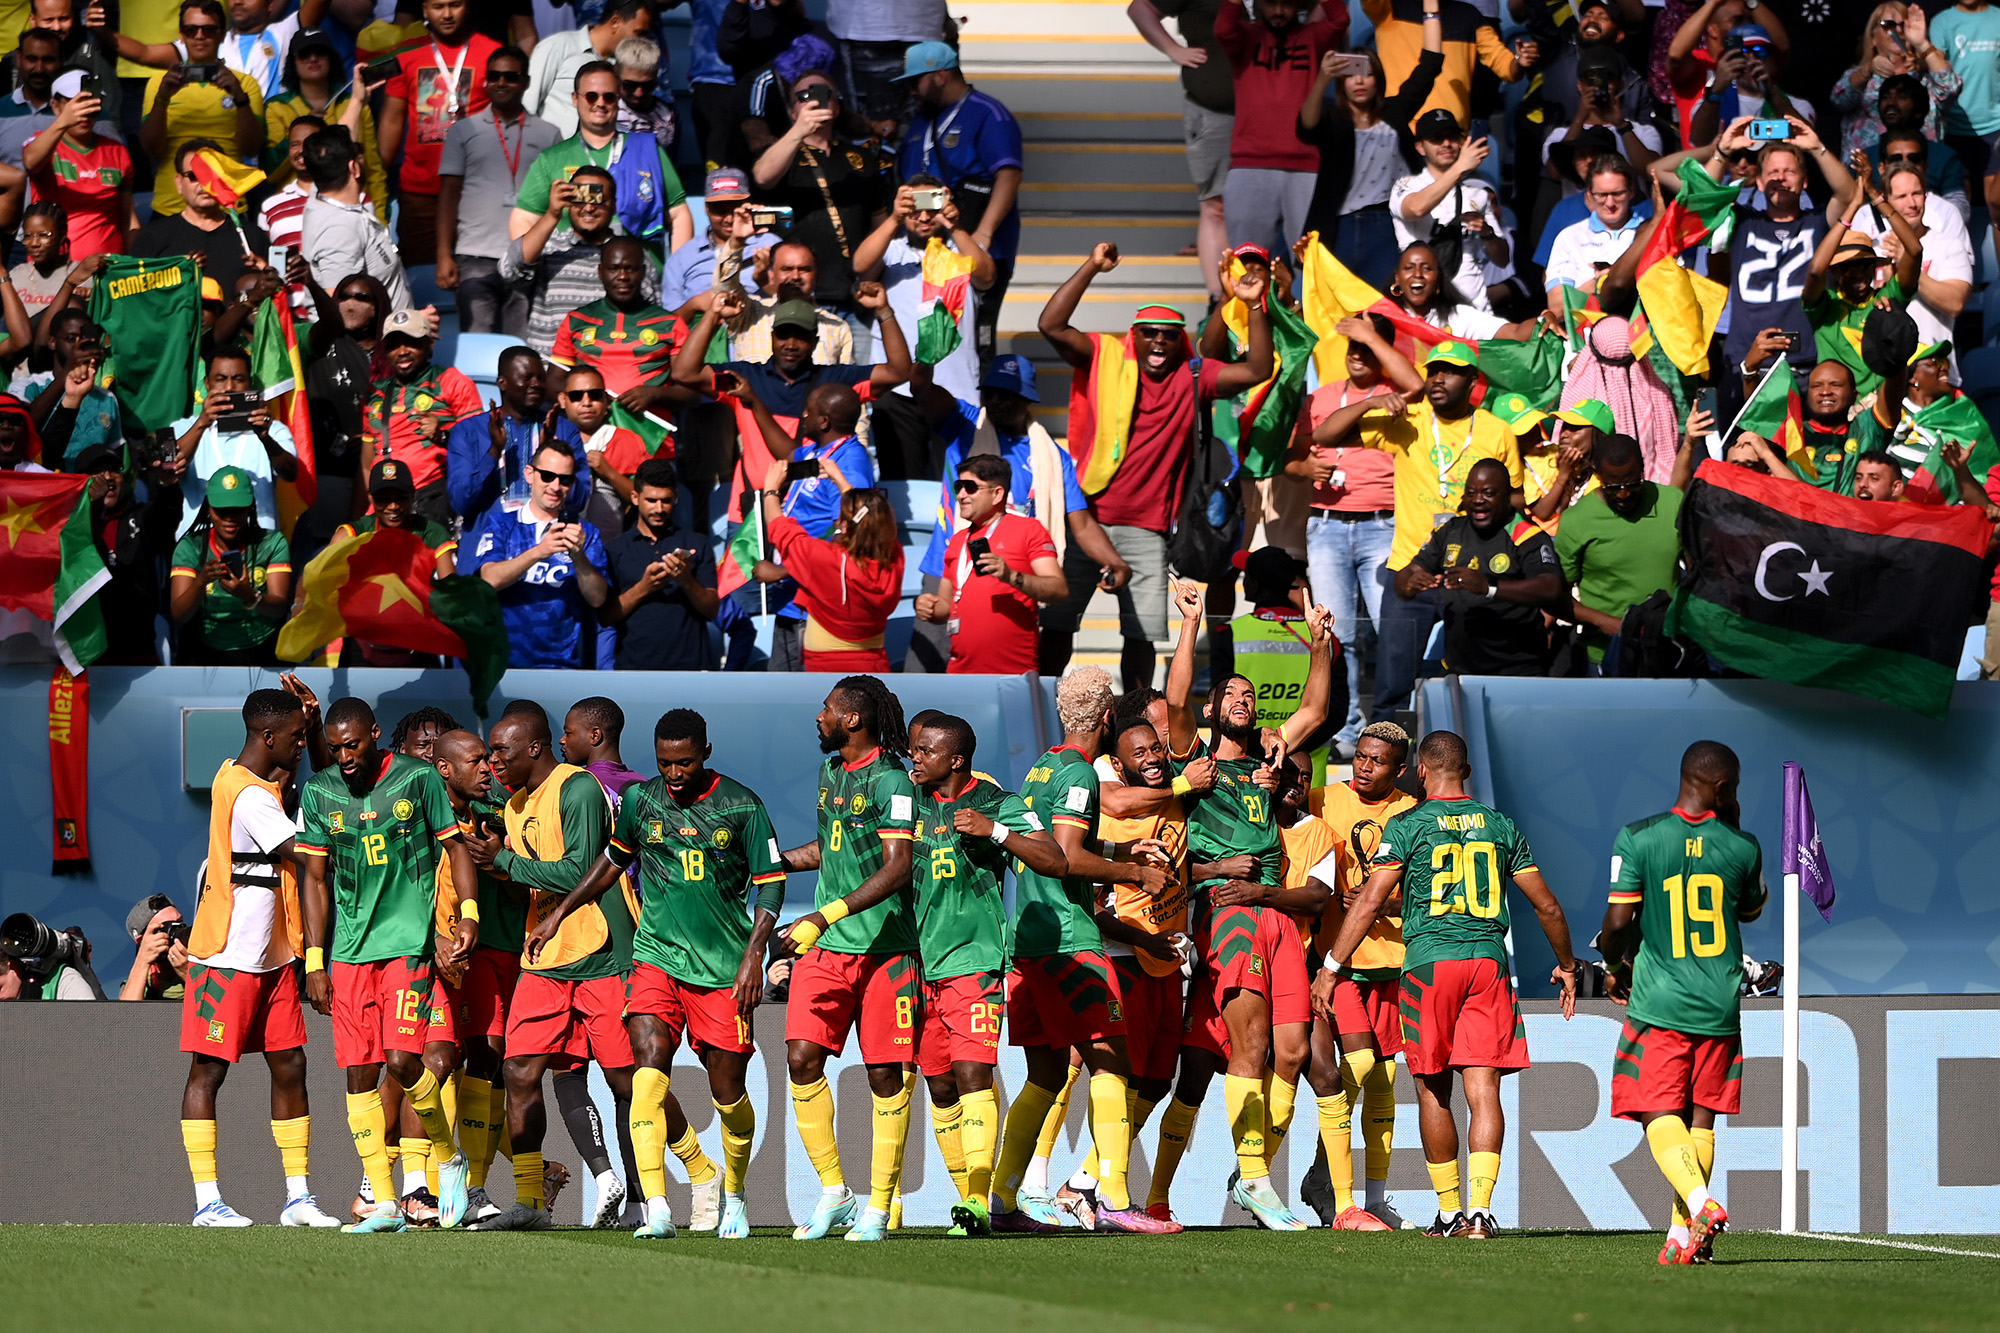 Jean-Charles Castelletto of Cameroon celebrates with teammates after scoring their team's first goal during the FIFA World Cup Qatar 2022 Group G match between Cameroon and Serbia at Al Janoub Stadium on November 28.